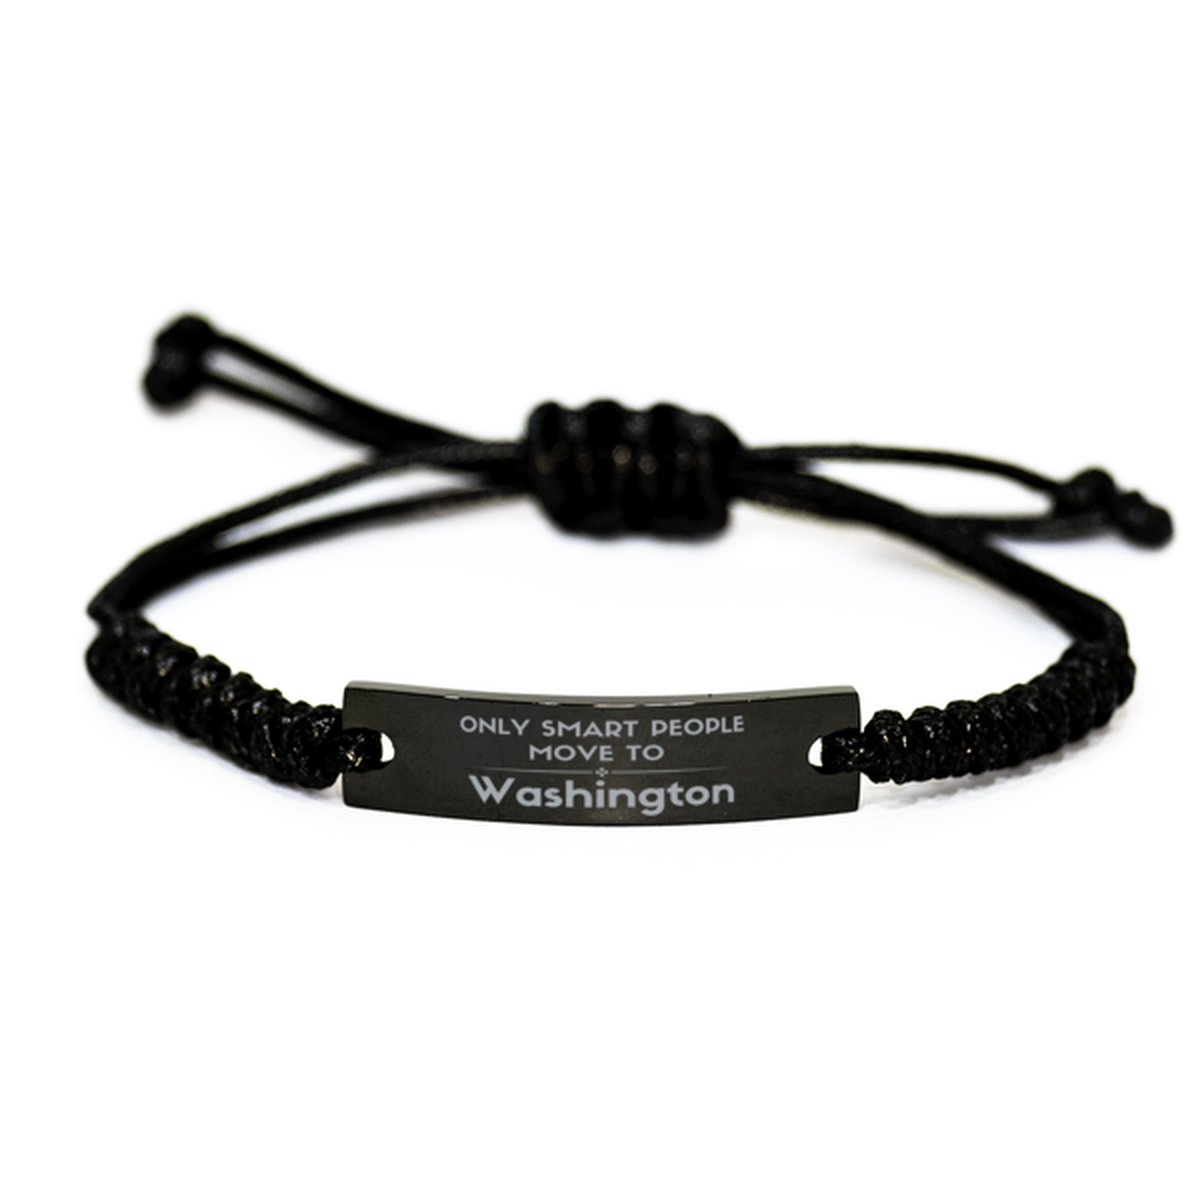 Only smart people move to Washington Black Rope Bracelet, Gag Gifts For Washington, Move to Washington Gifts for Friends Coworker Funny Saying Quote